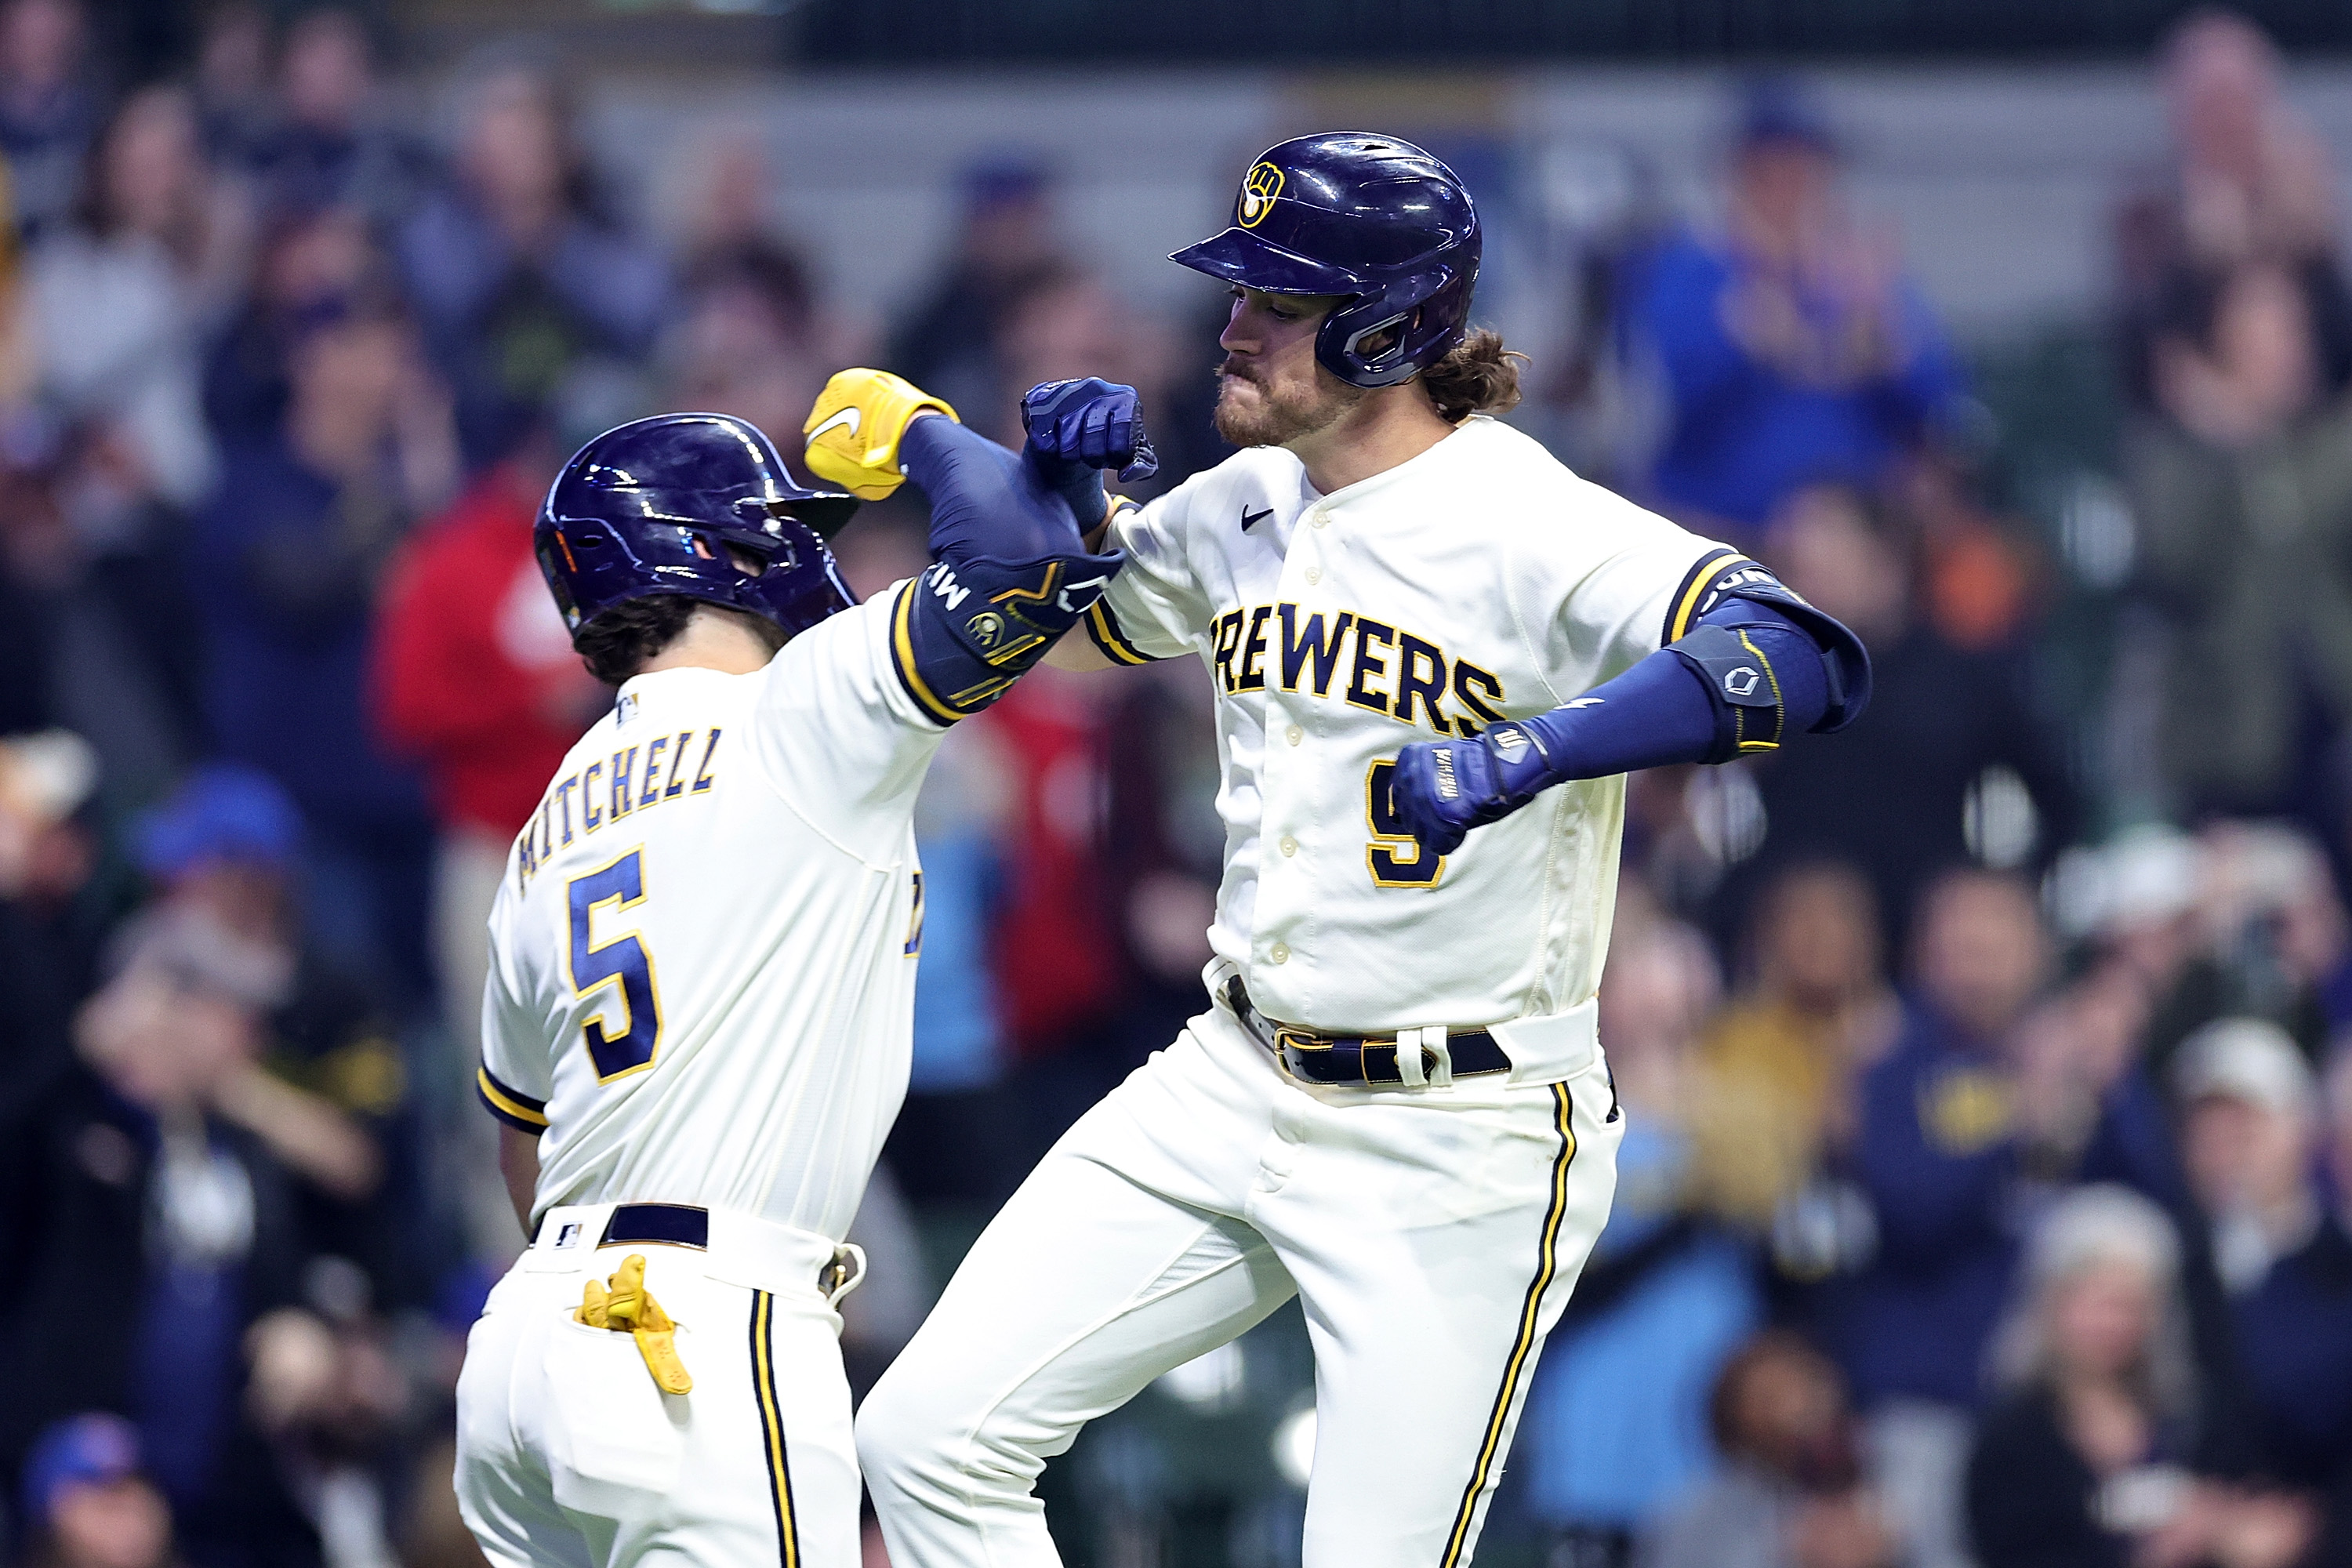 Ranking All Five Current Brewers Uniforms From Worst to Best